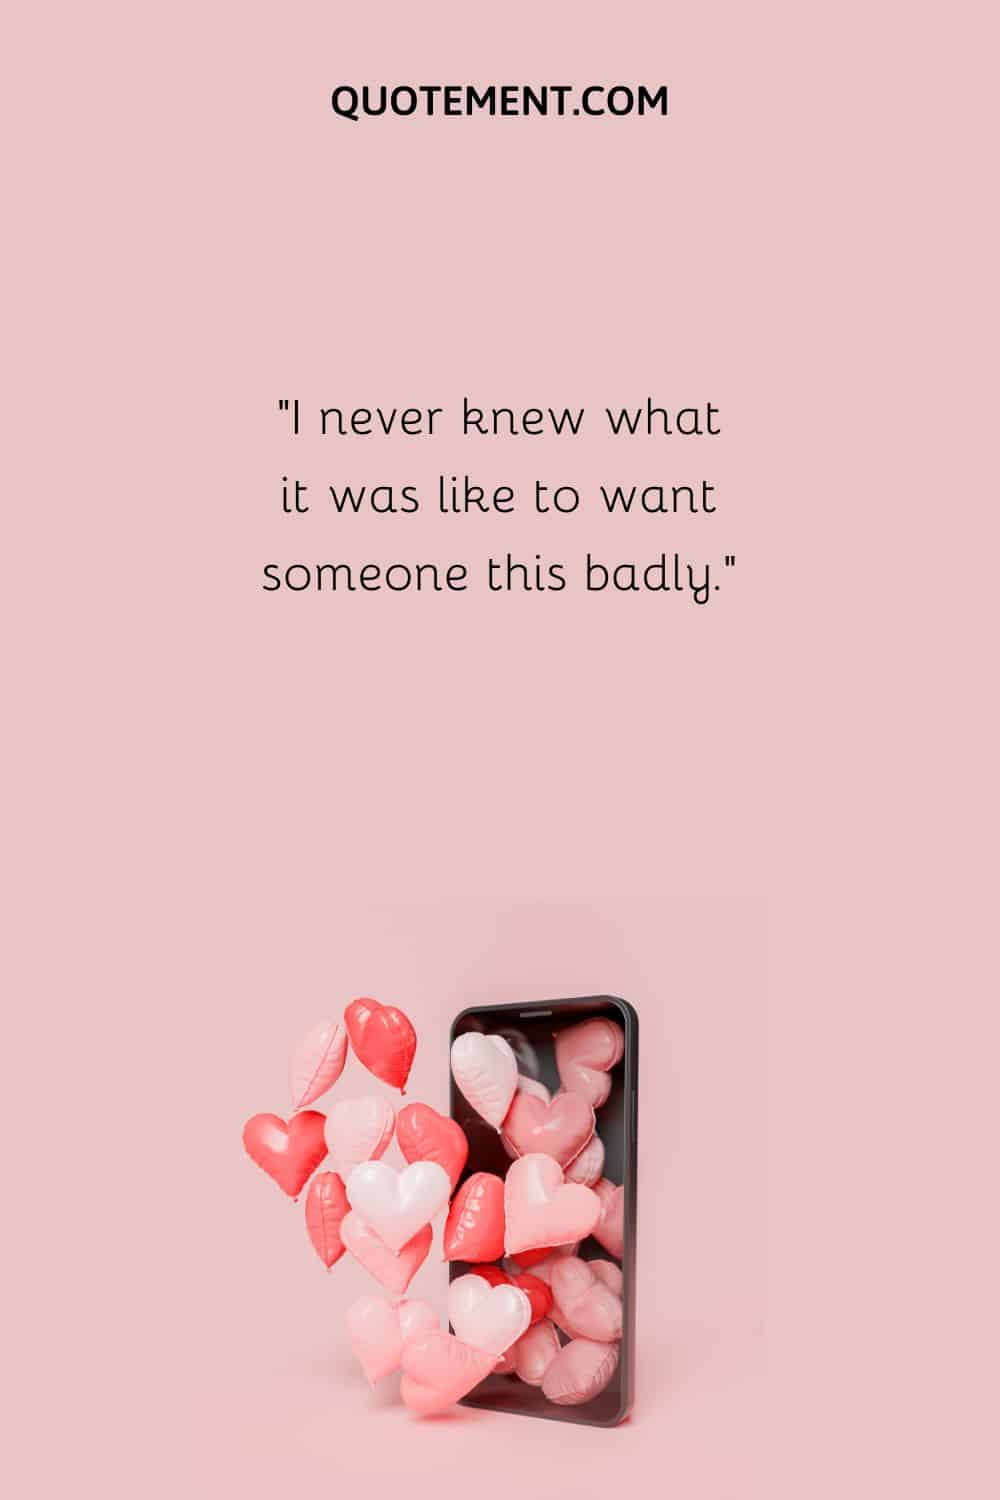 “I never knew what it was like to want someone this badly.”